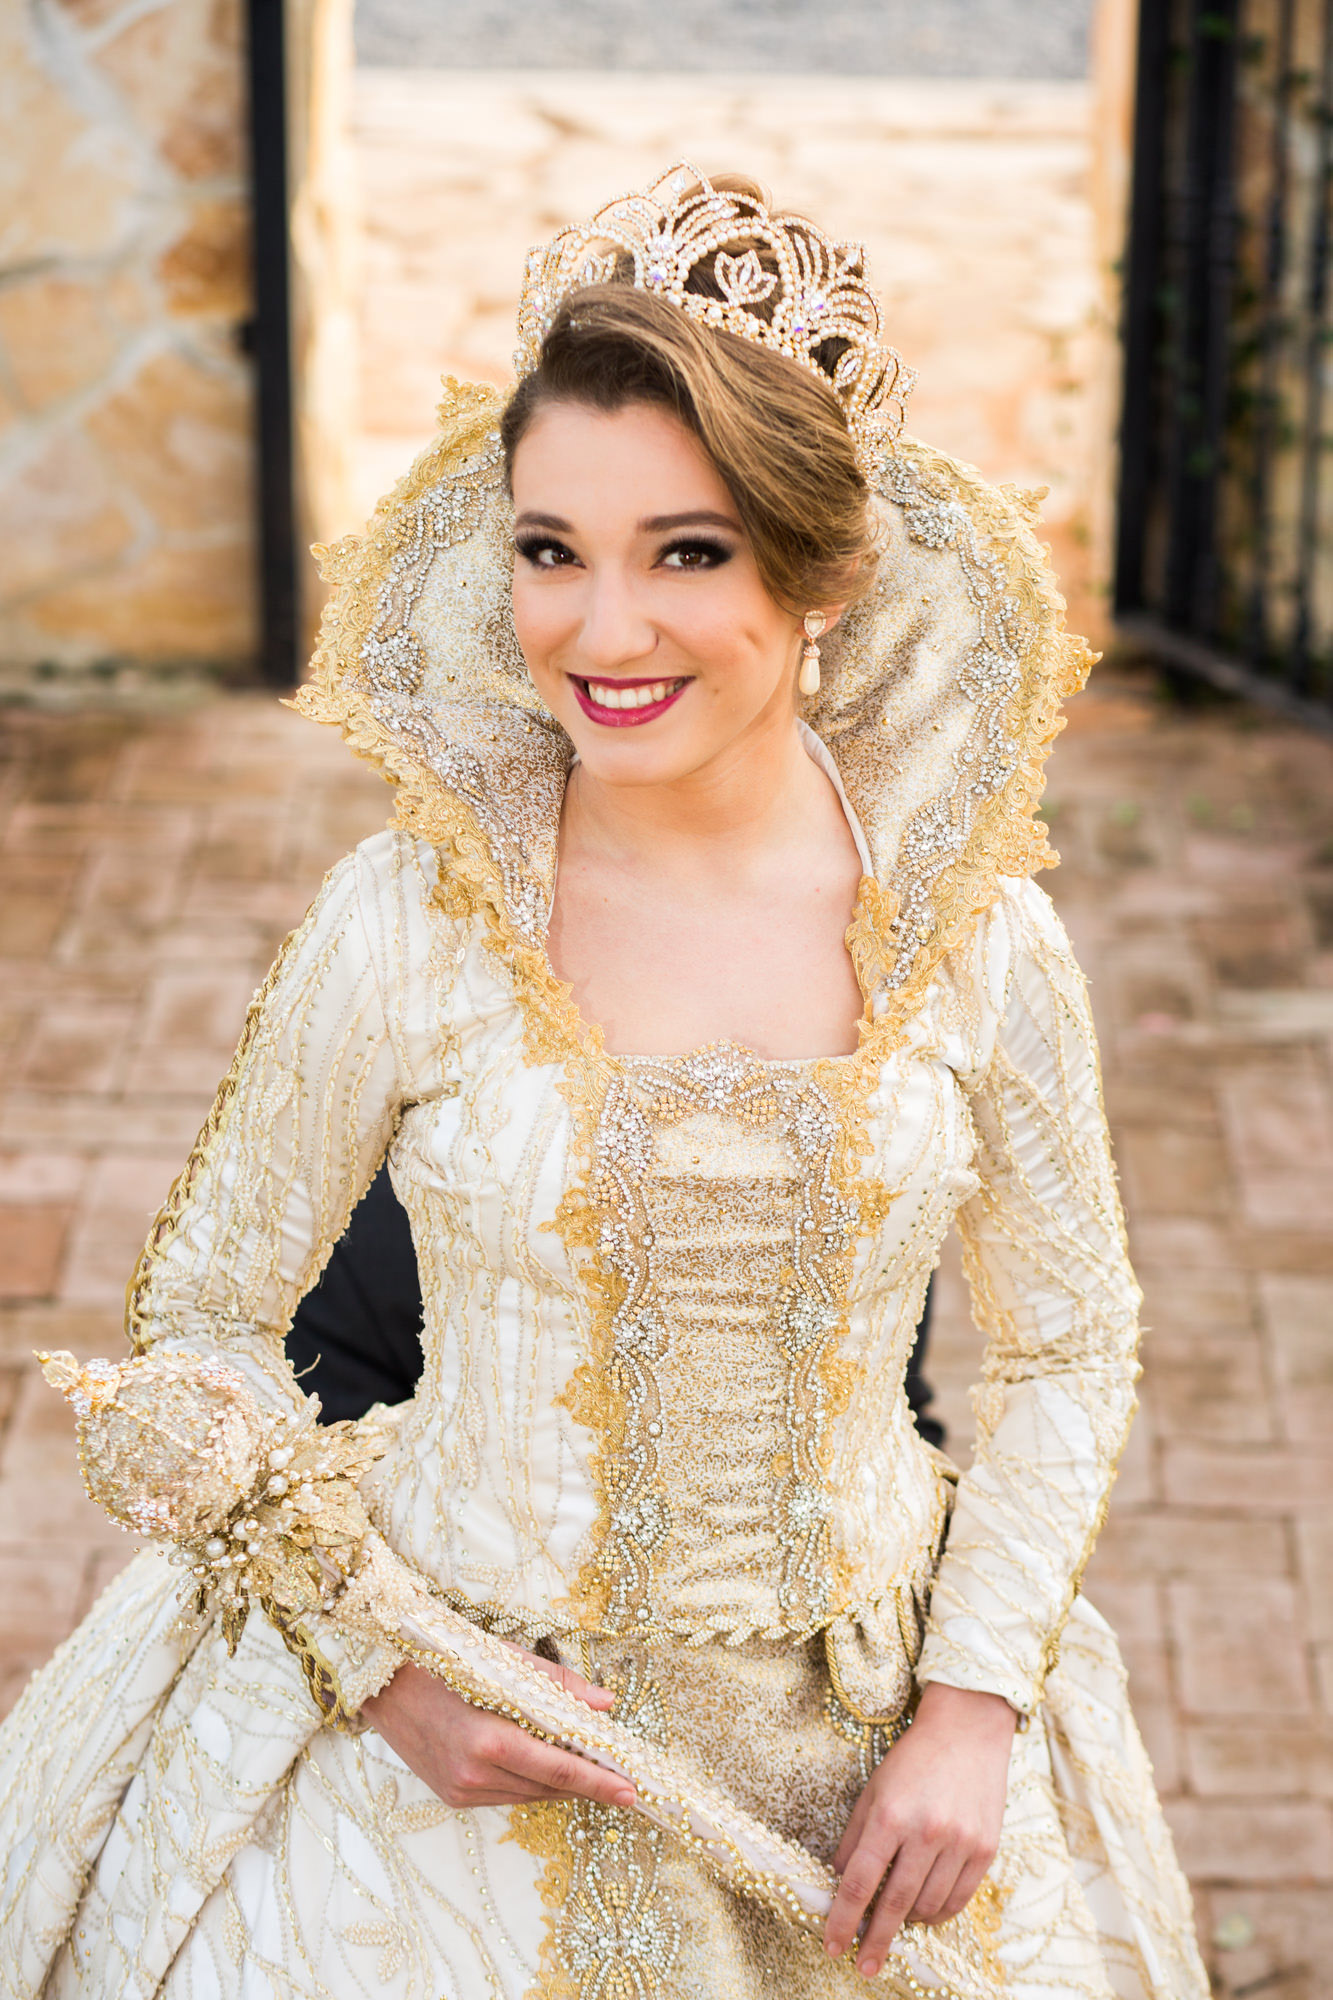 UTRGV junior Alexandria Canchola is this year’s reigning Queen Citrianna the 82nd and is on the Royal Court of Mission’s Texas Citrus Fiesta, which celebrates agricultural and the citrus industry in the Valley. A McAllen native with roots in Mission, the exercise science major won the title in January 2018 and assumed her duties at the beginning of 2019. (Courtesy Photo)